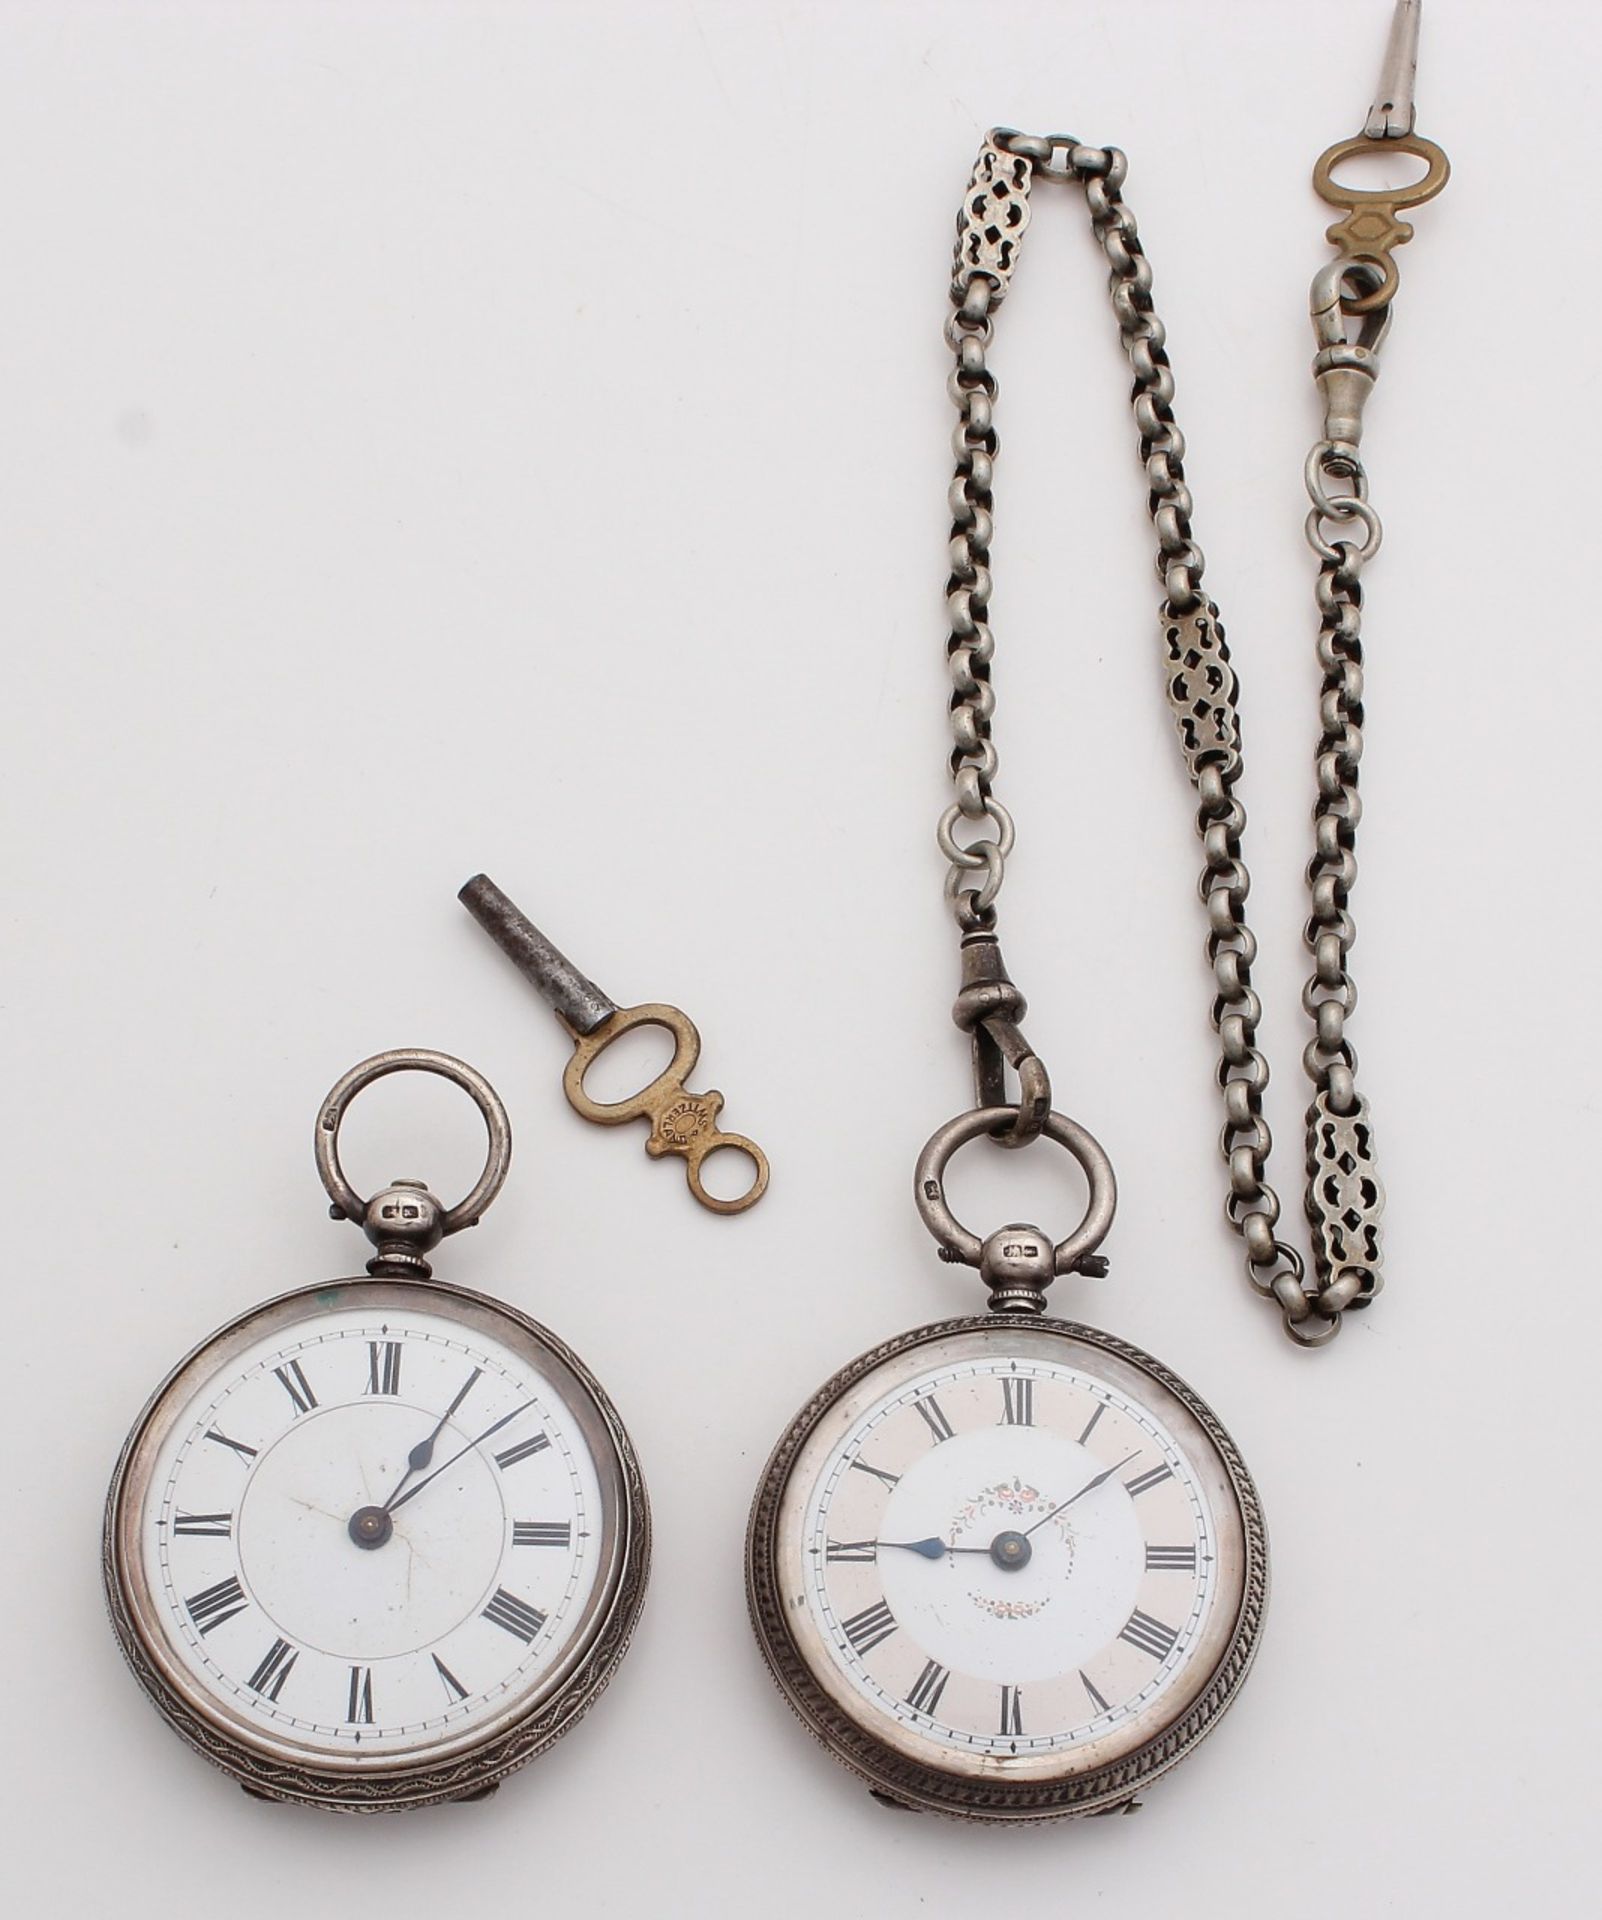 Lot with two silver pocket watches, English 925/000. A pocket watch with a dial decorated with small